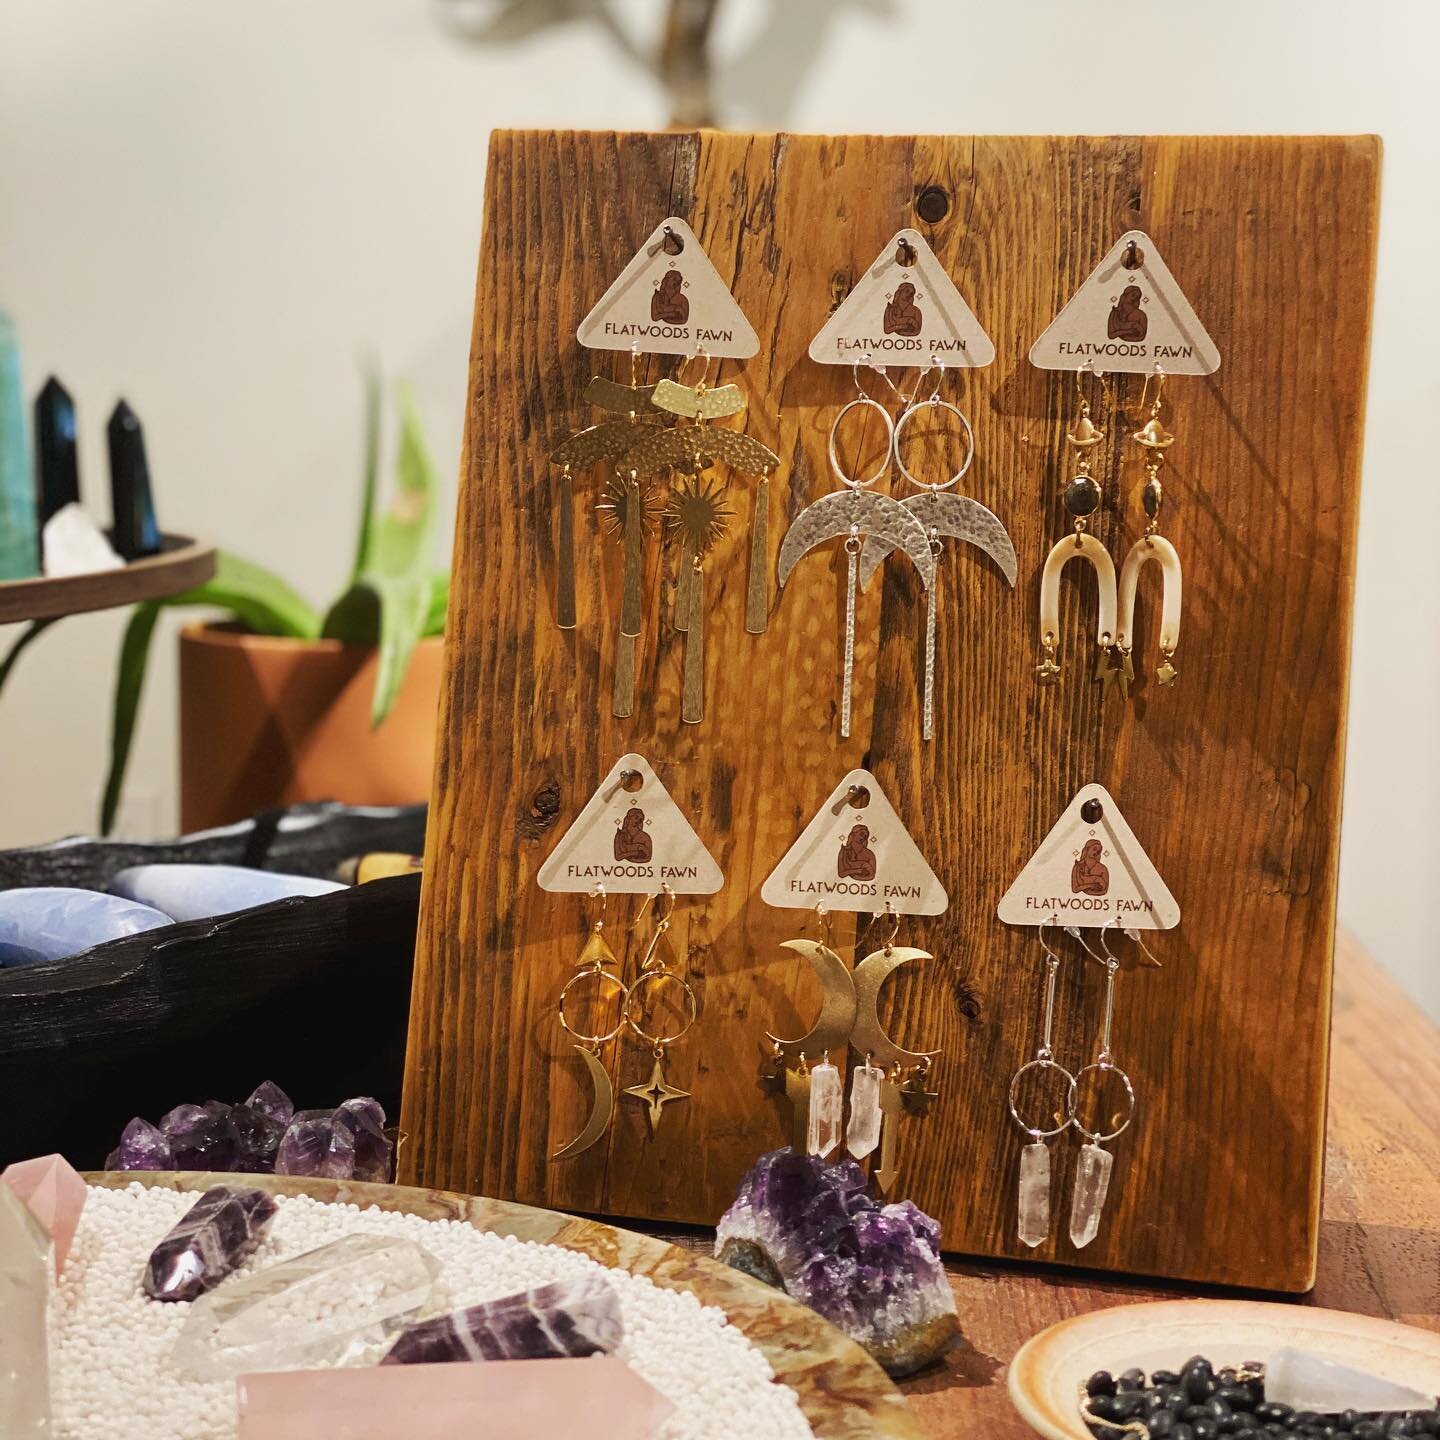 New artist alert! Ashley Massey of @flatwoodsfawn creates beautiful, mystical jewelry perfect for the modern spiritual seeker! Lightweight, affordable, and super unique... this first batch will not last long! See the full collection online, or swing 